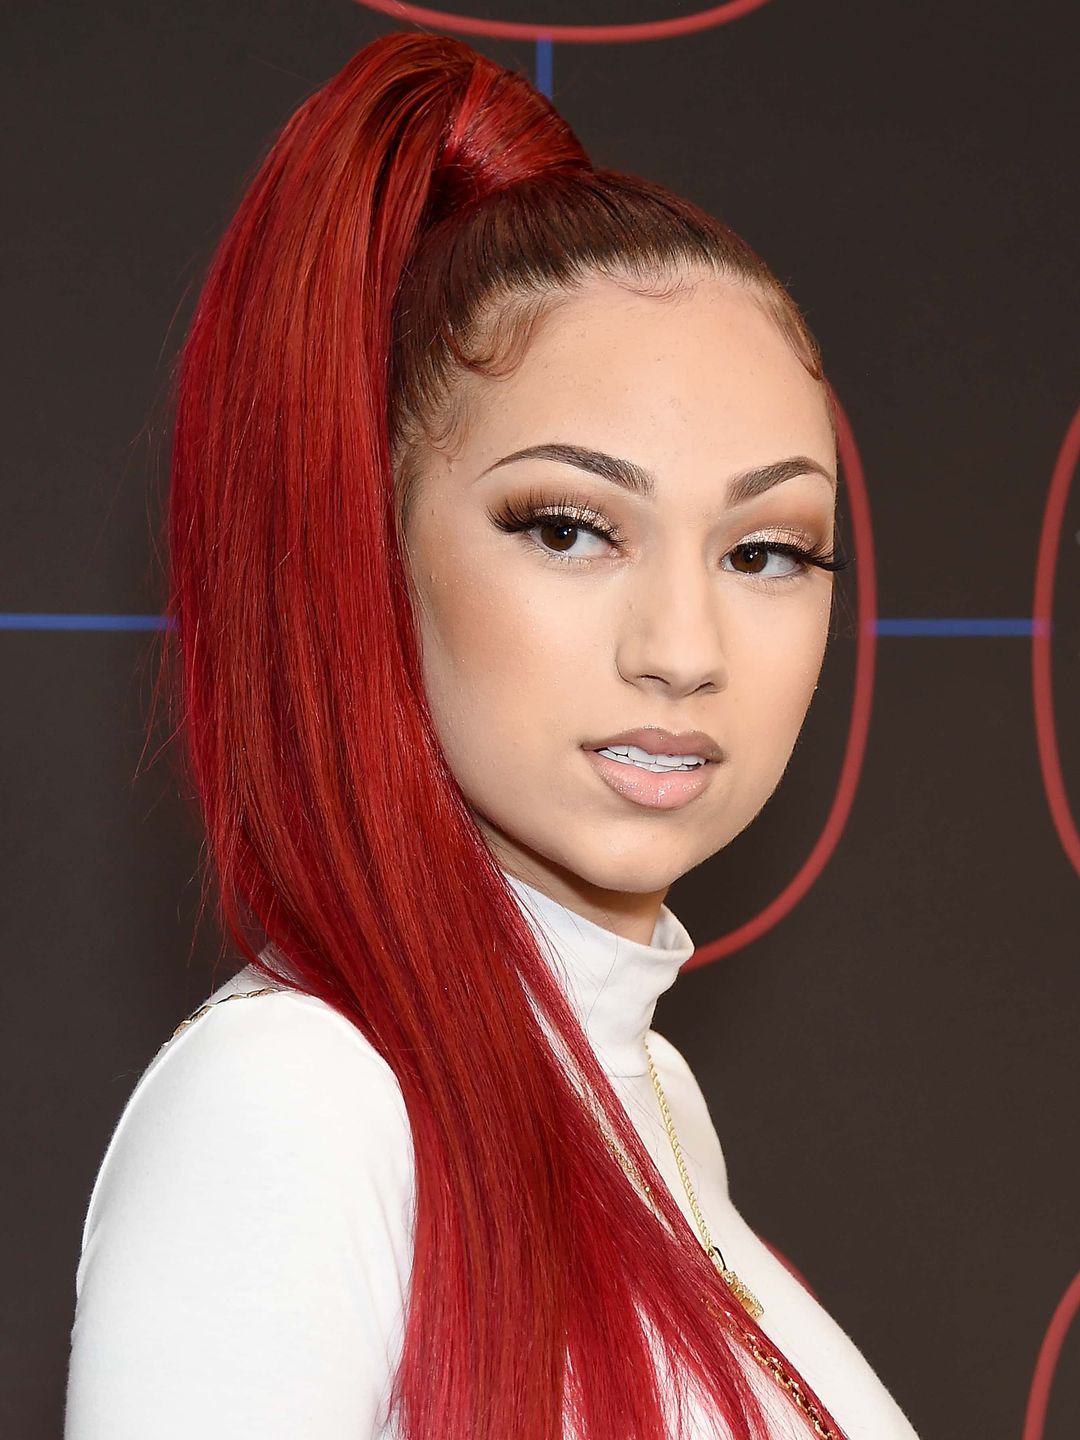 Danielle Bregoli who is her mother